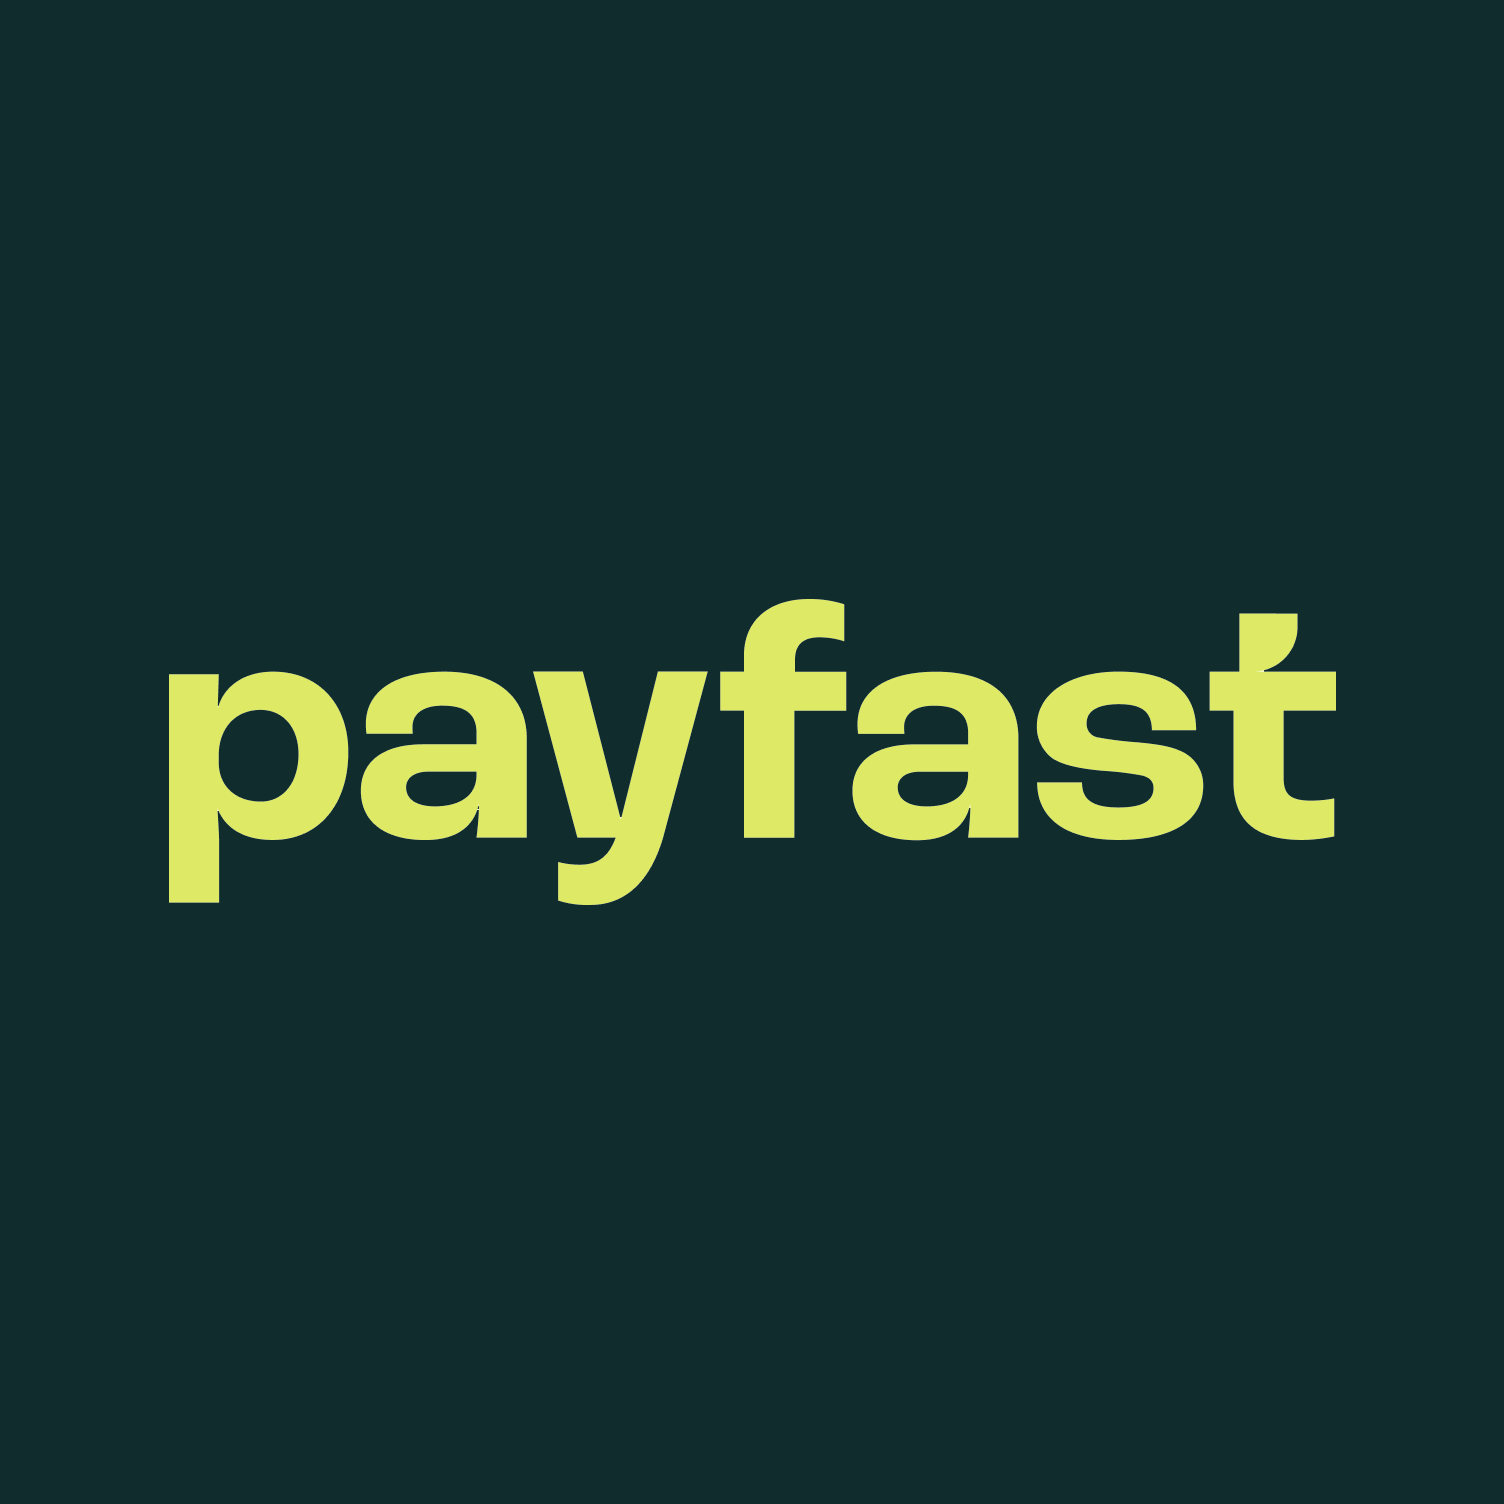 Payfast.png